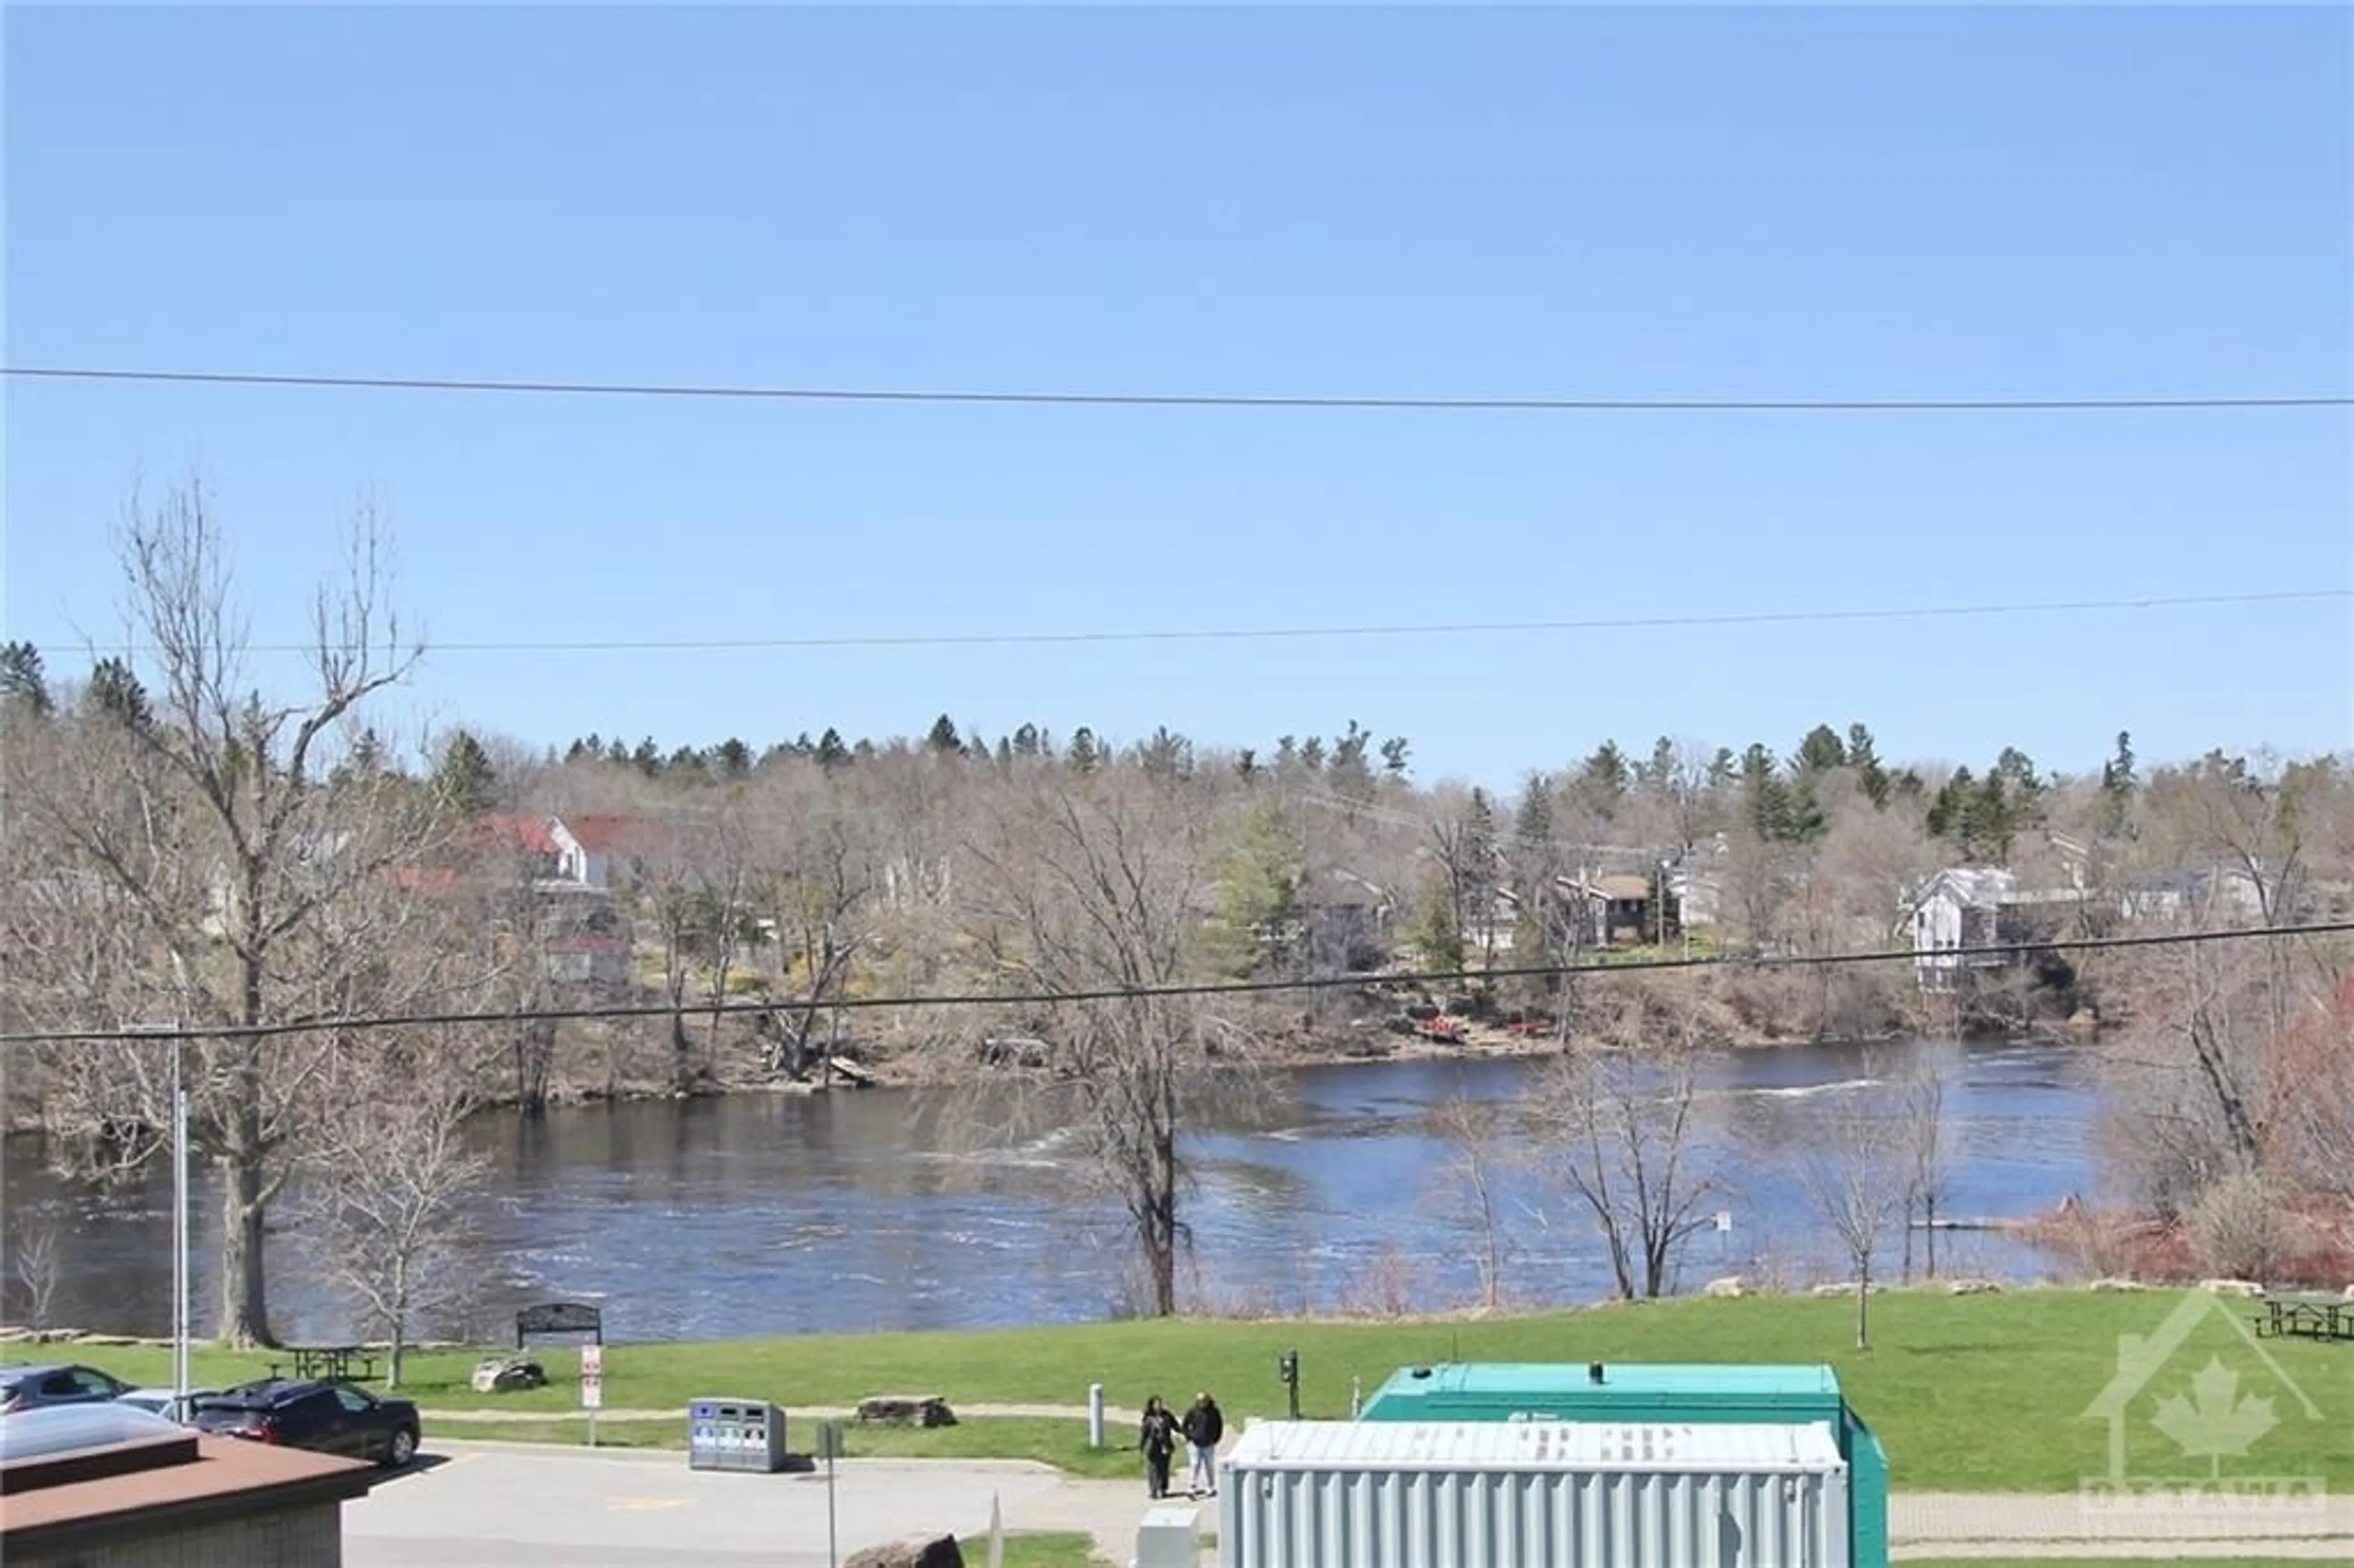 Lakeview for 97 ALMONTE St, Almonte Ontario K0A 1A0